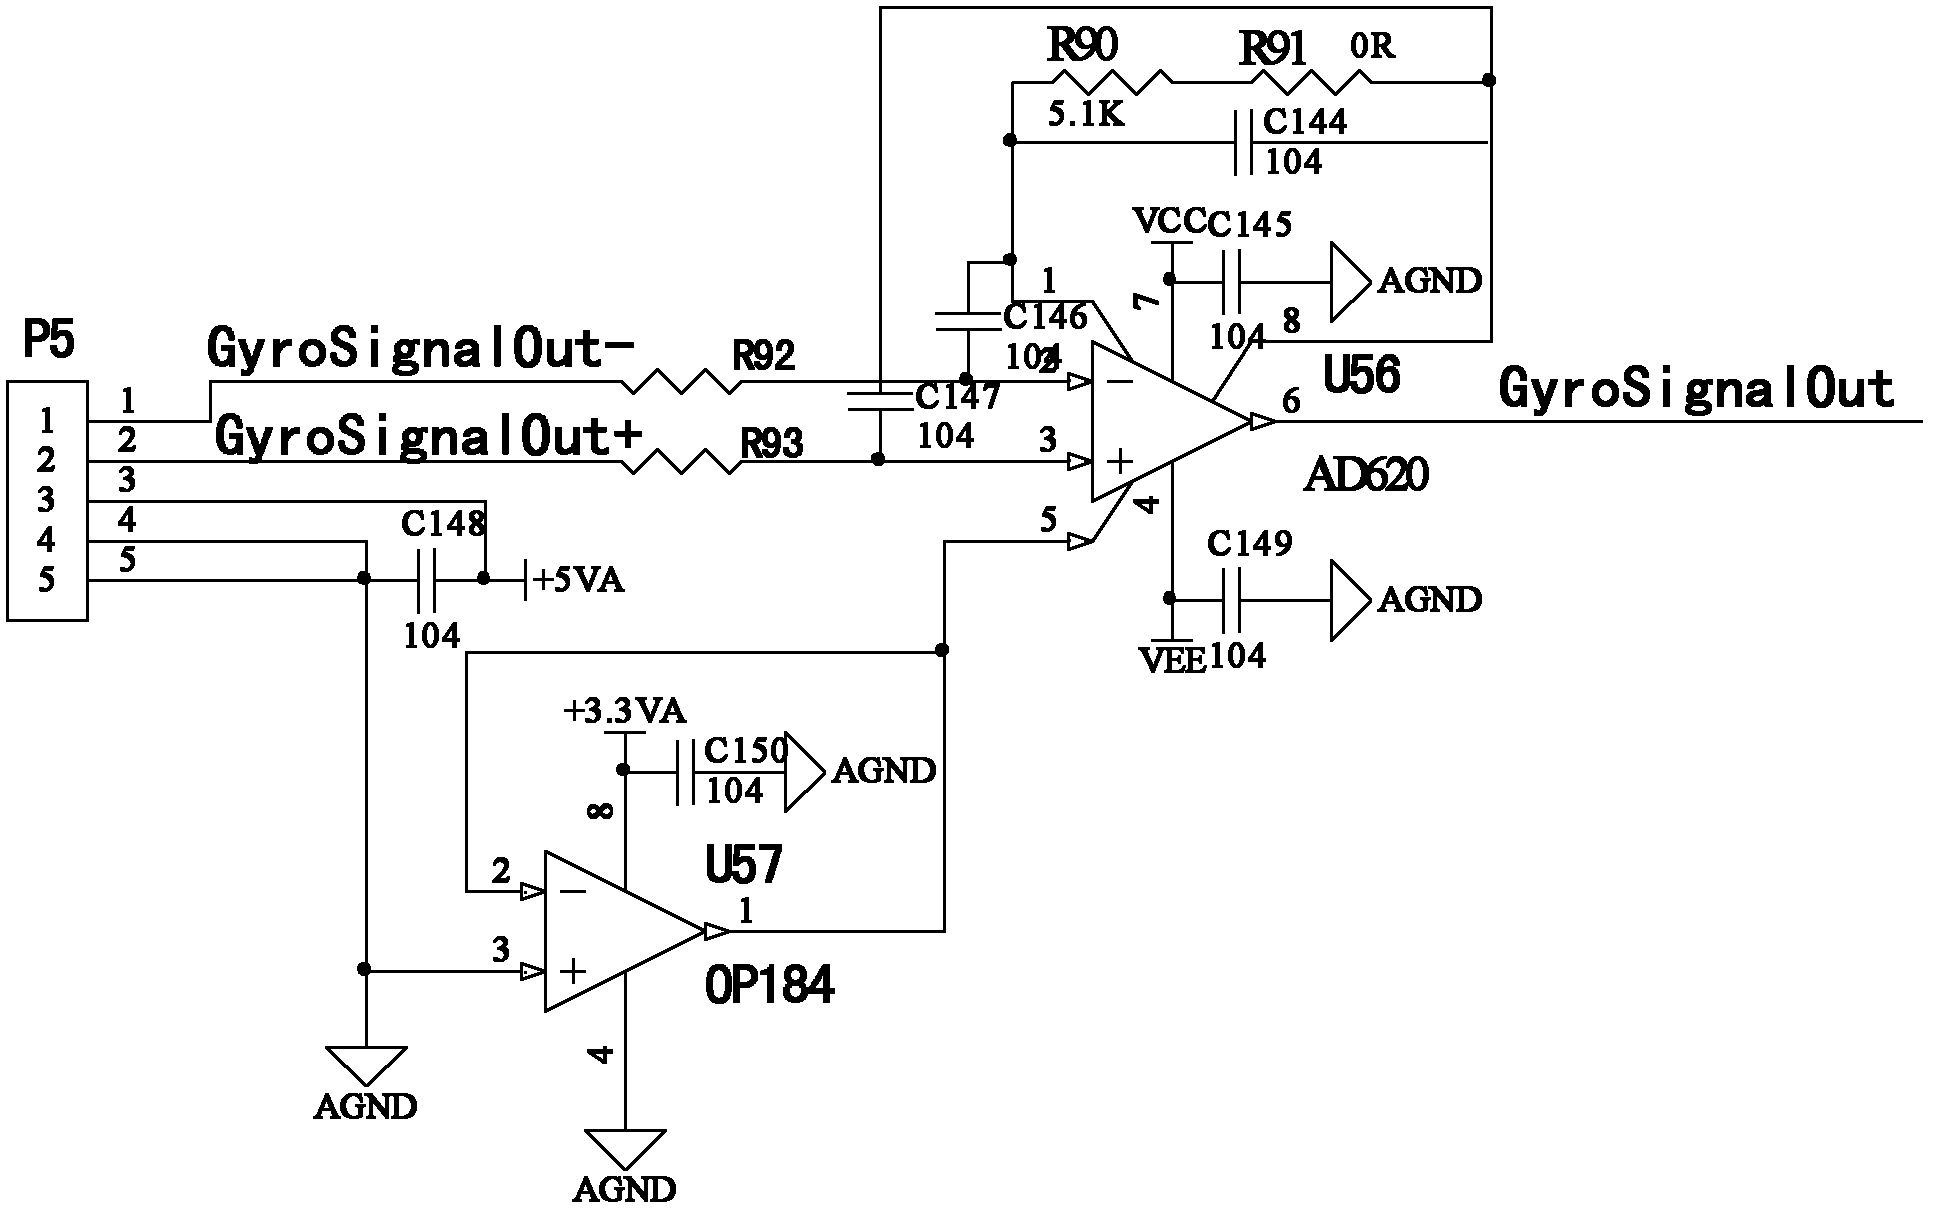 Gyro signal acquisition circuit and signal filtering system for three-axis inertially-stabilized platform